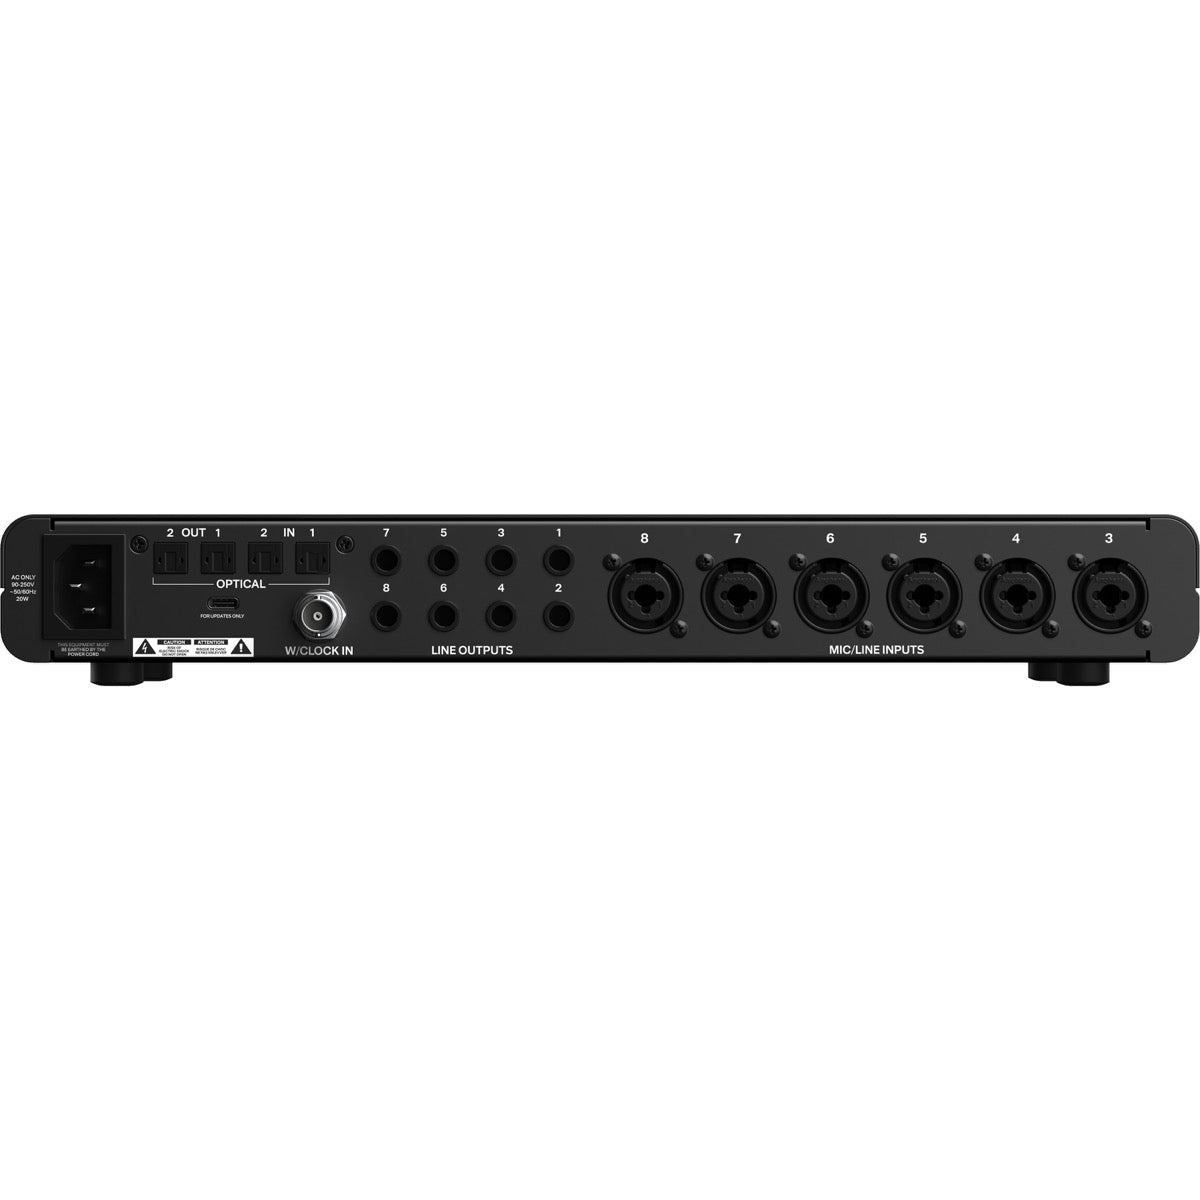 Audient Evo SP8 8-Channel Mic Preamp 16-CHANNEL RIG